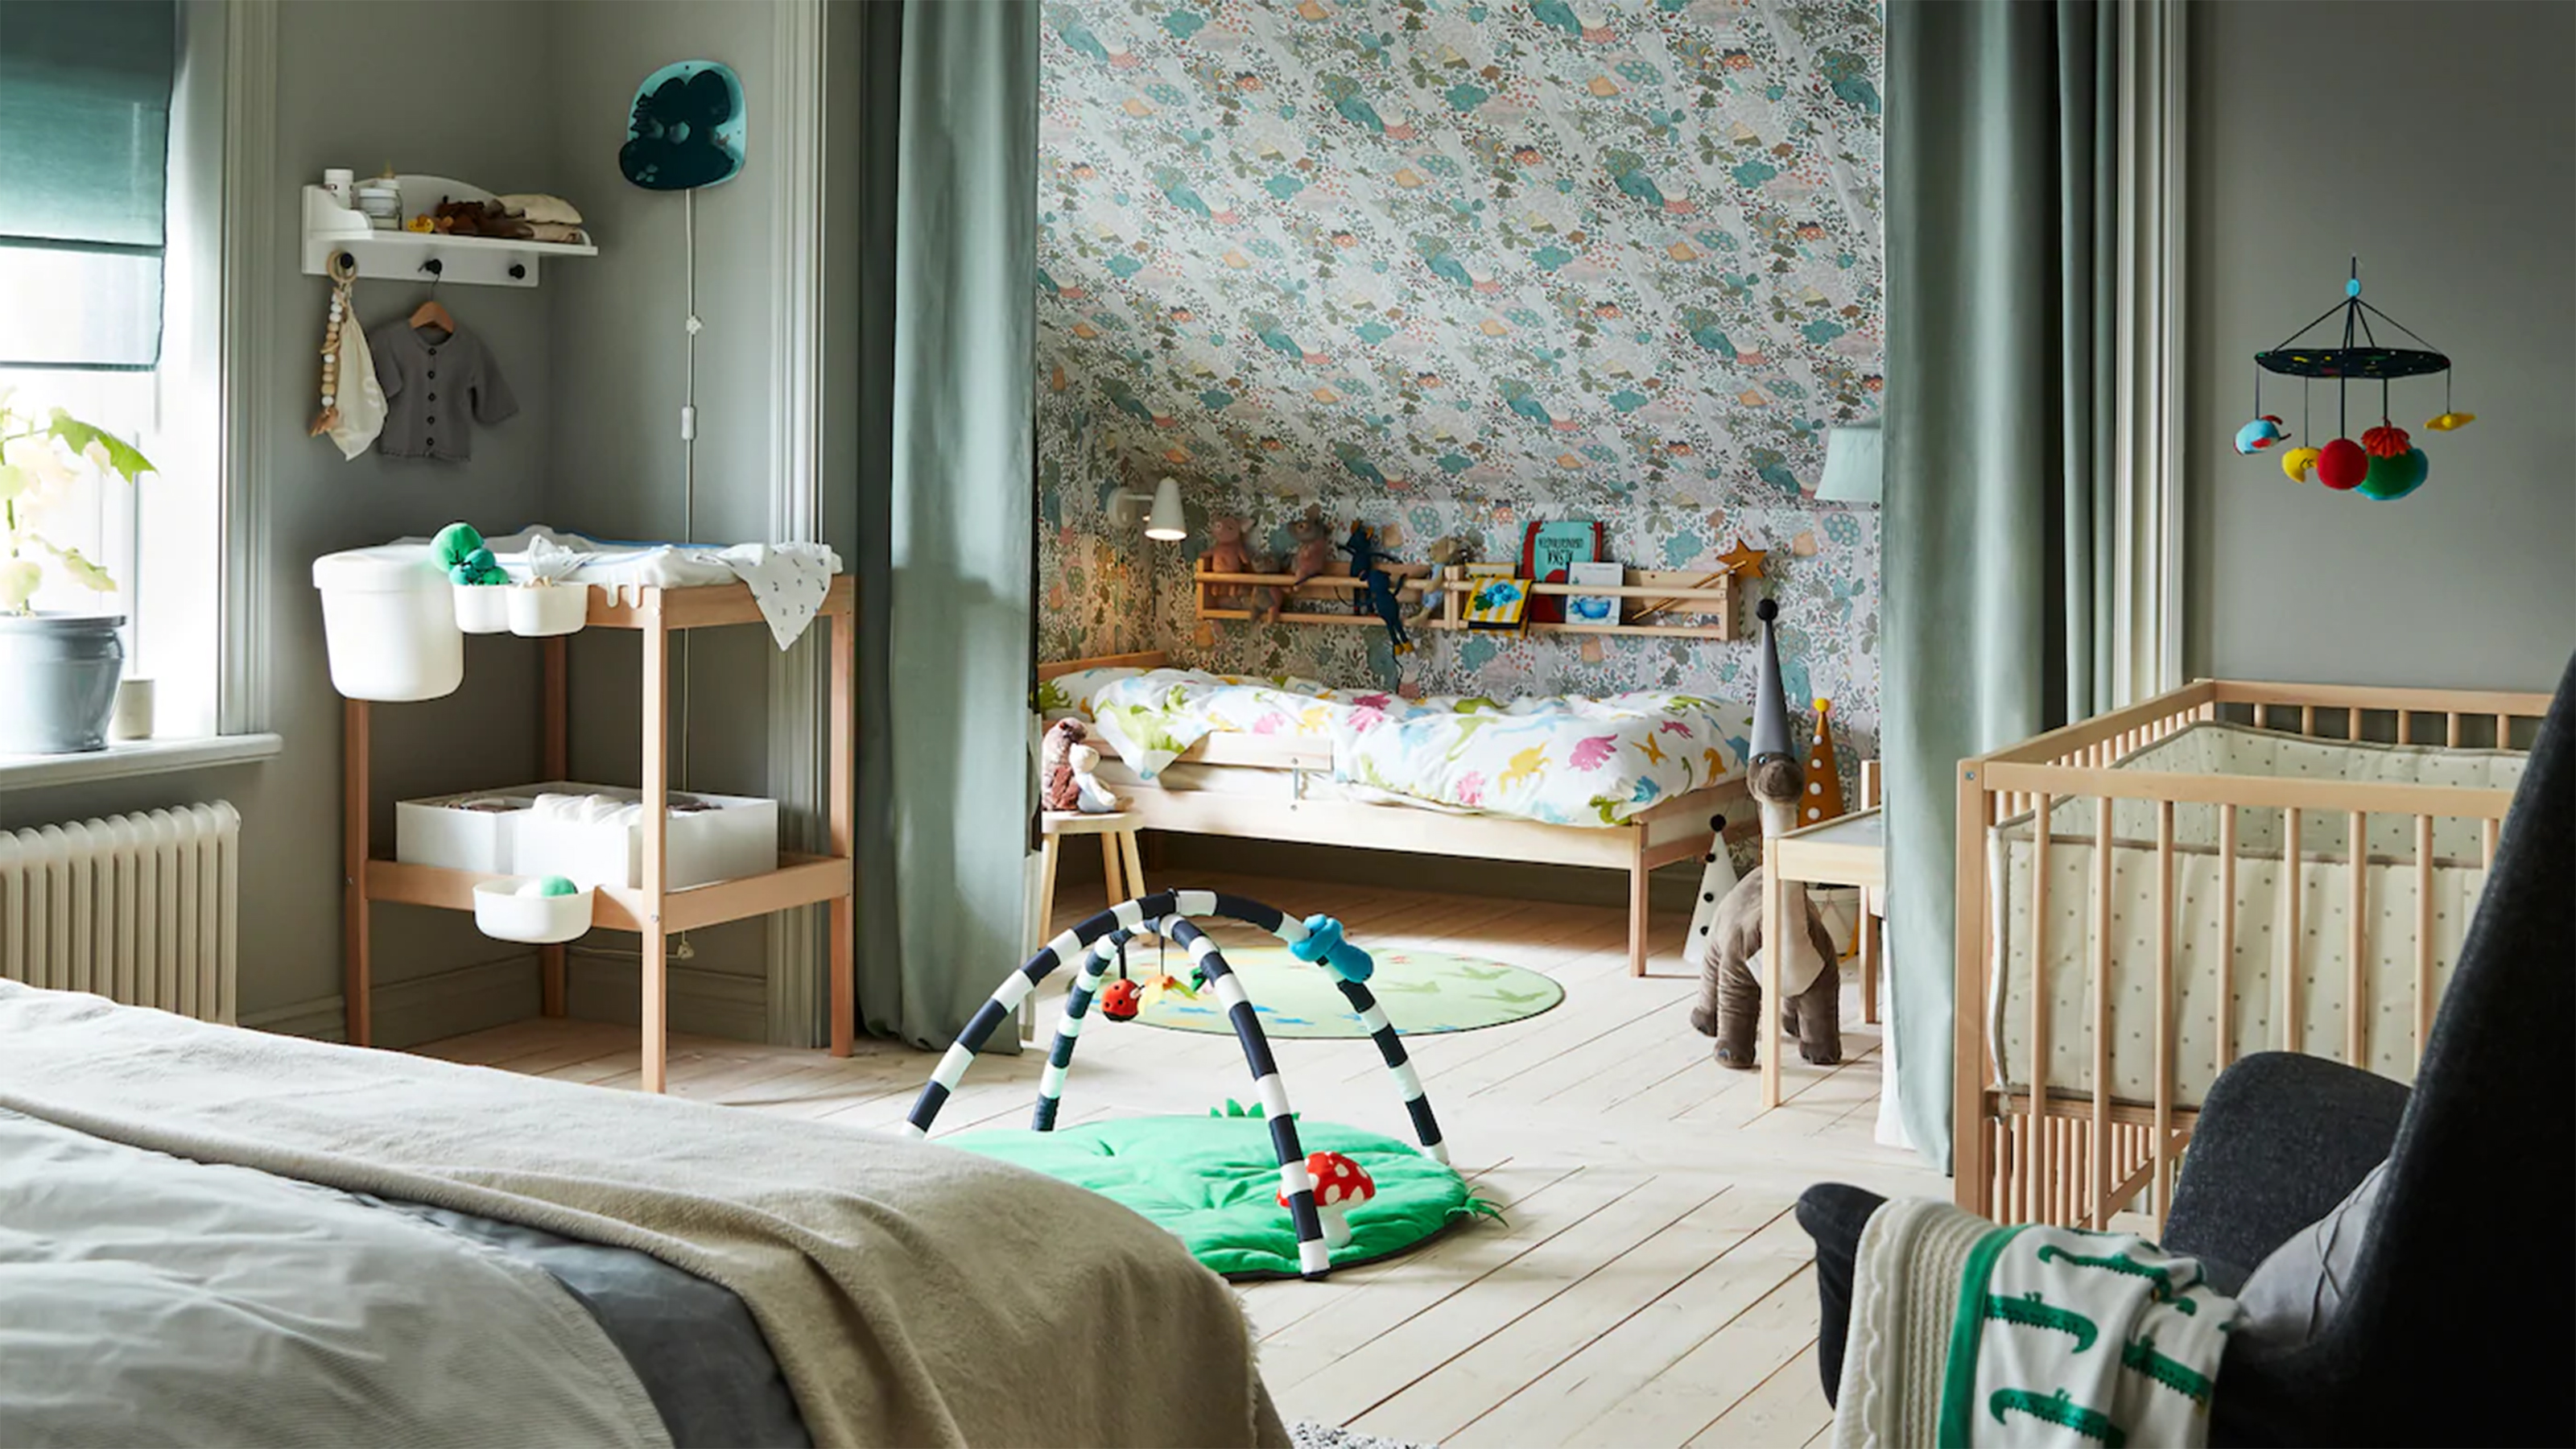 20 shared bedroom ideas how to divide a shared kids room   Real Homes